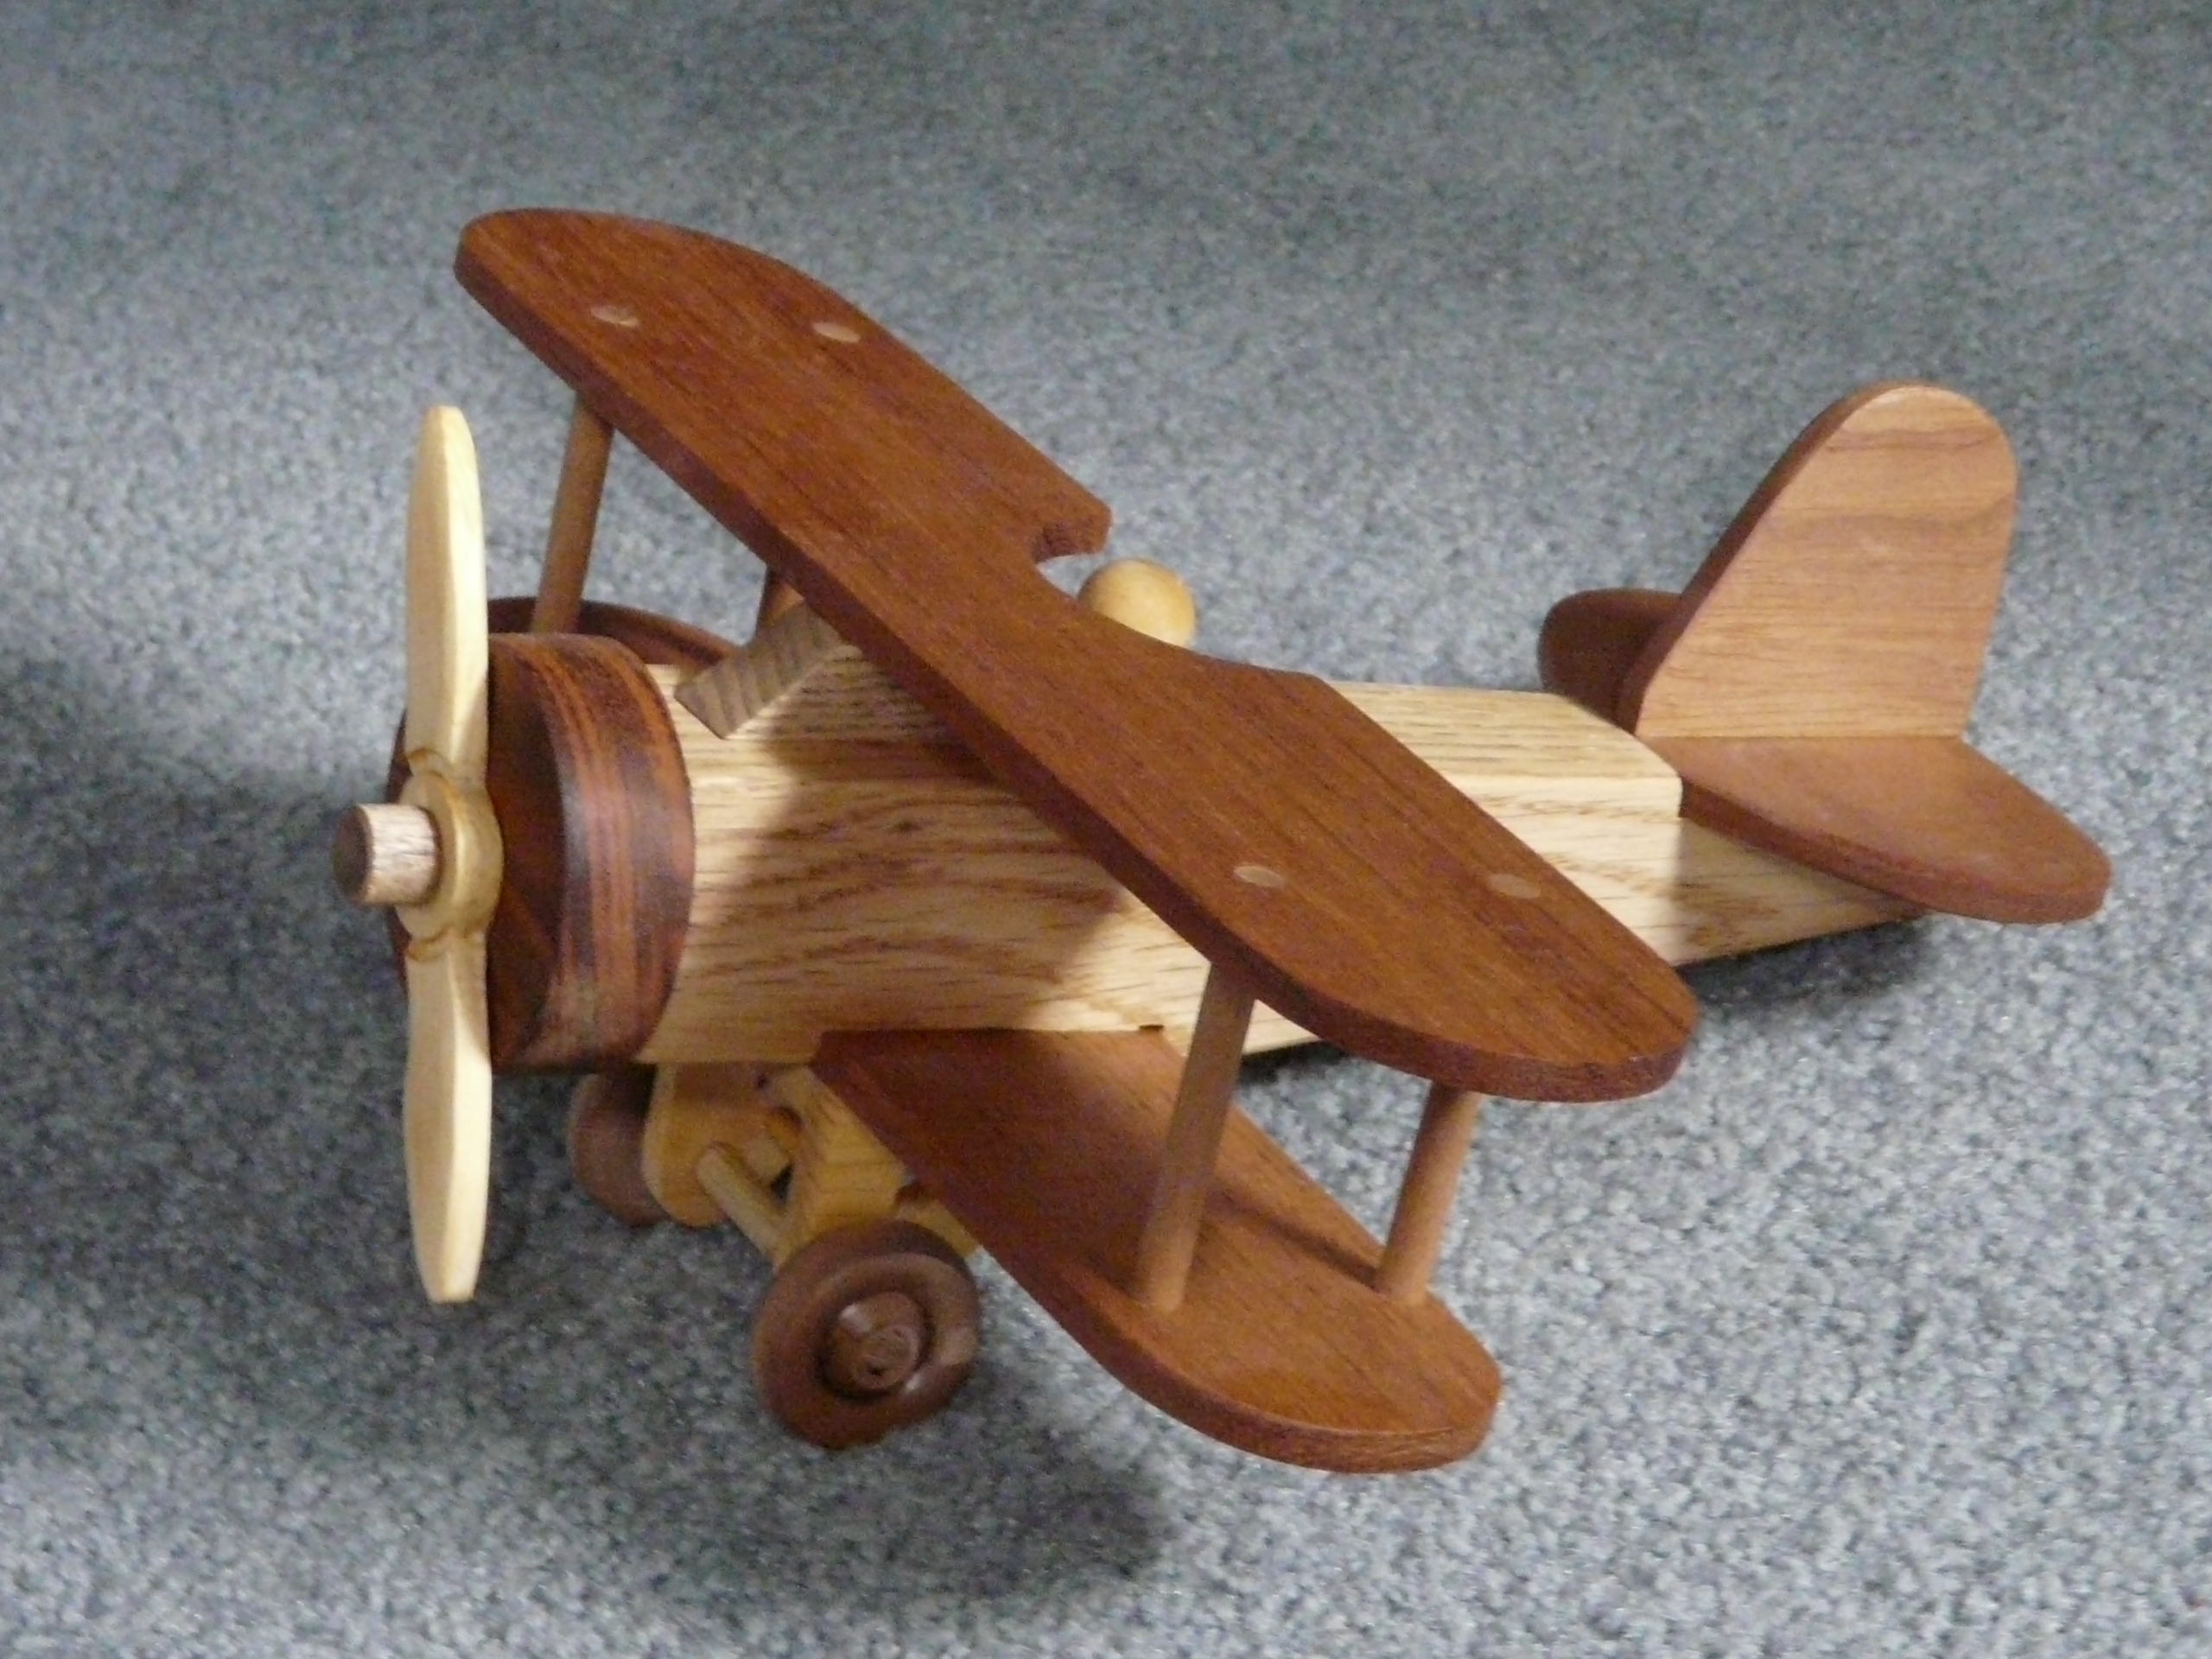 Wooden Toy Plans